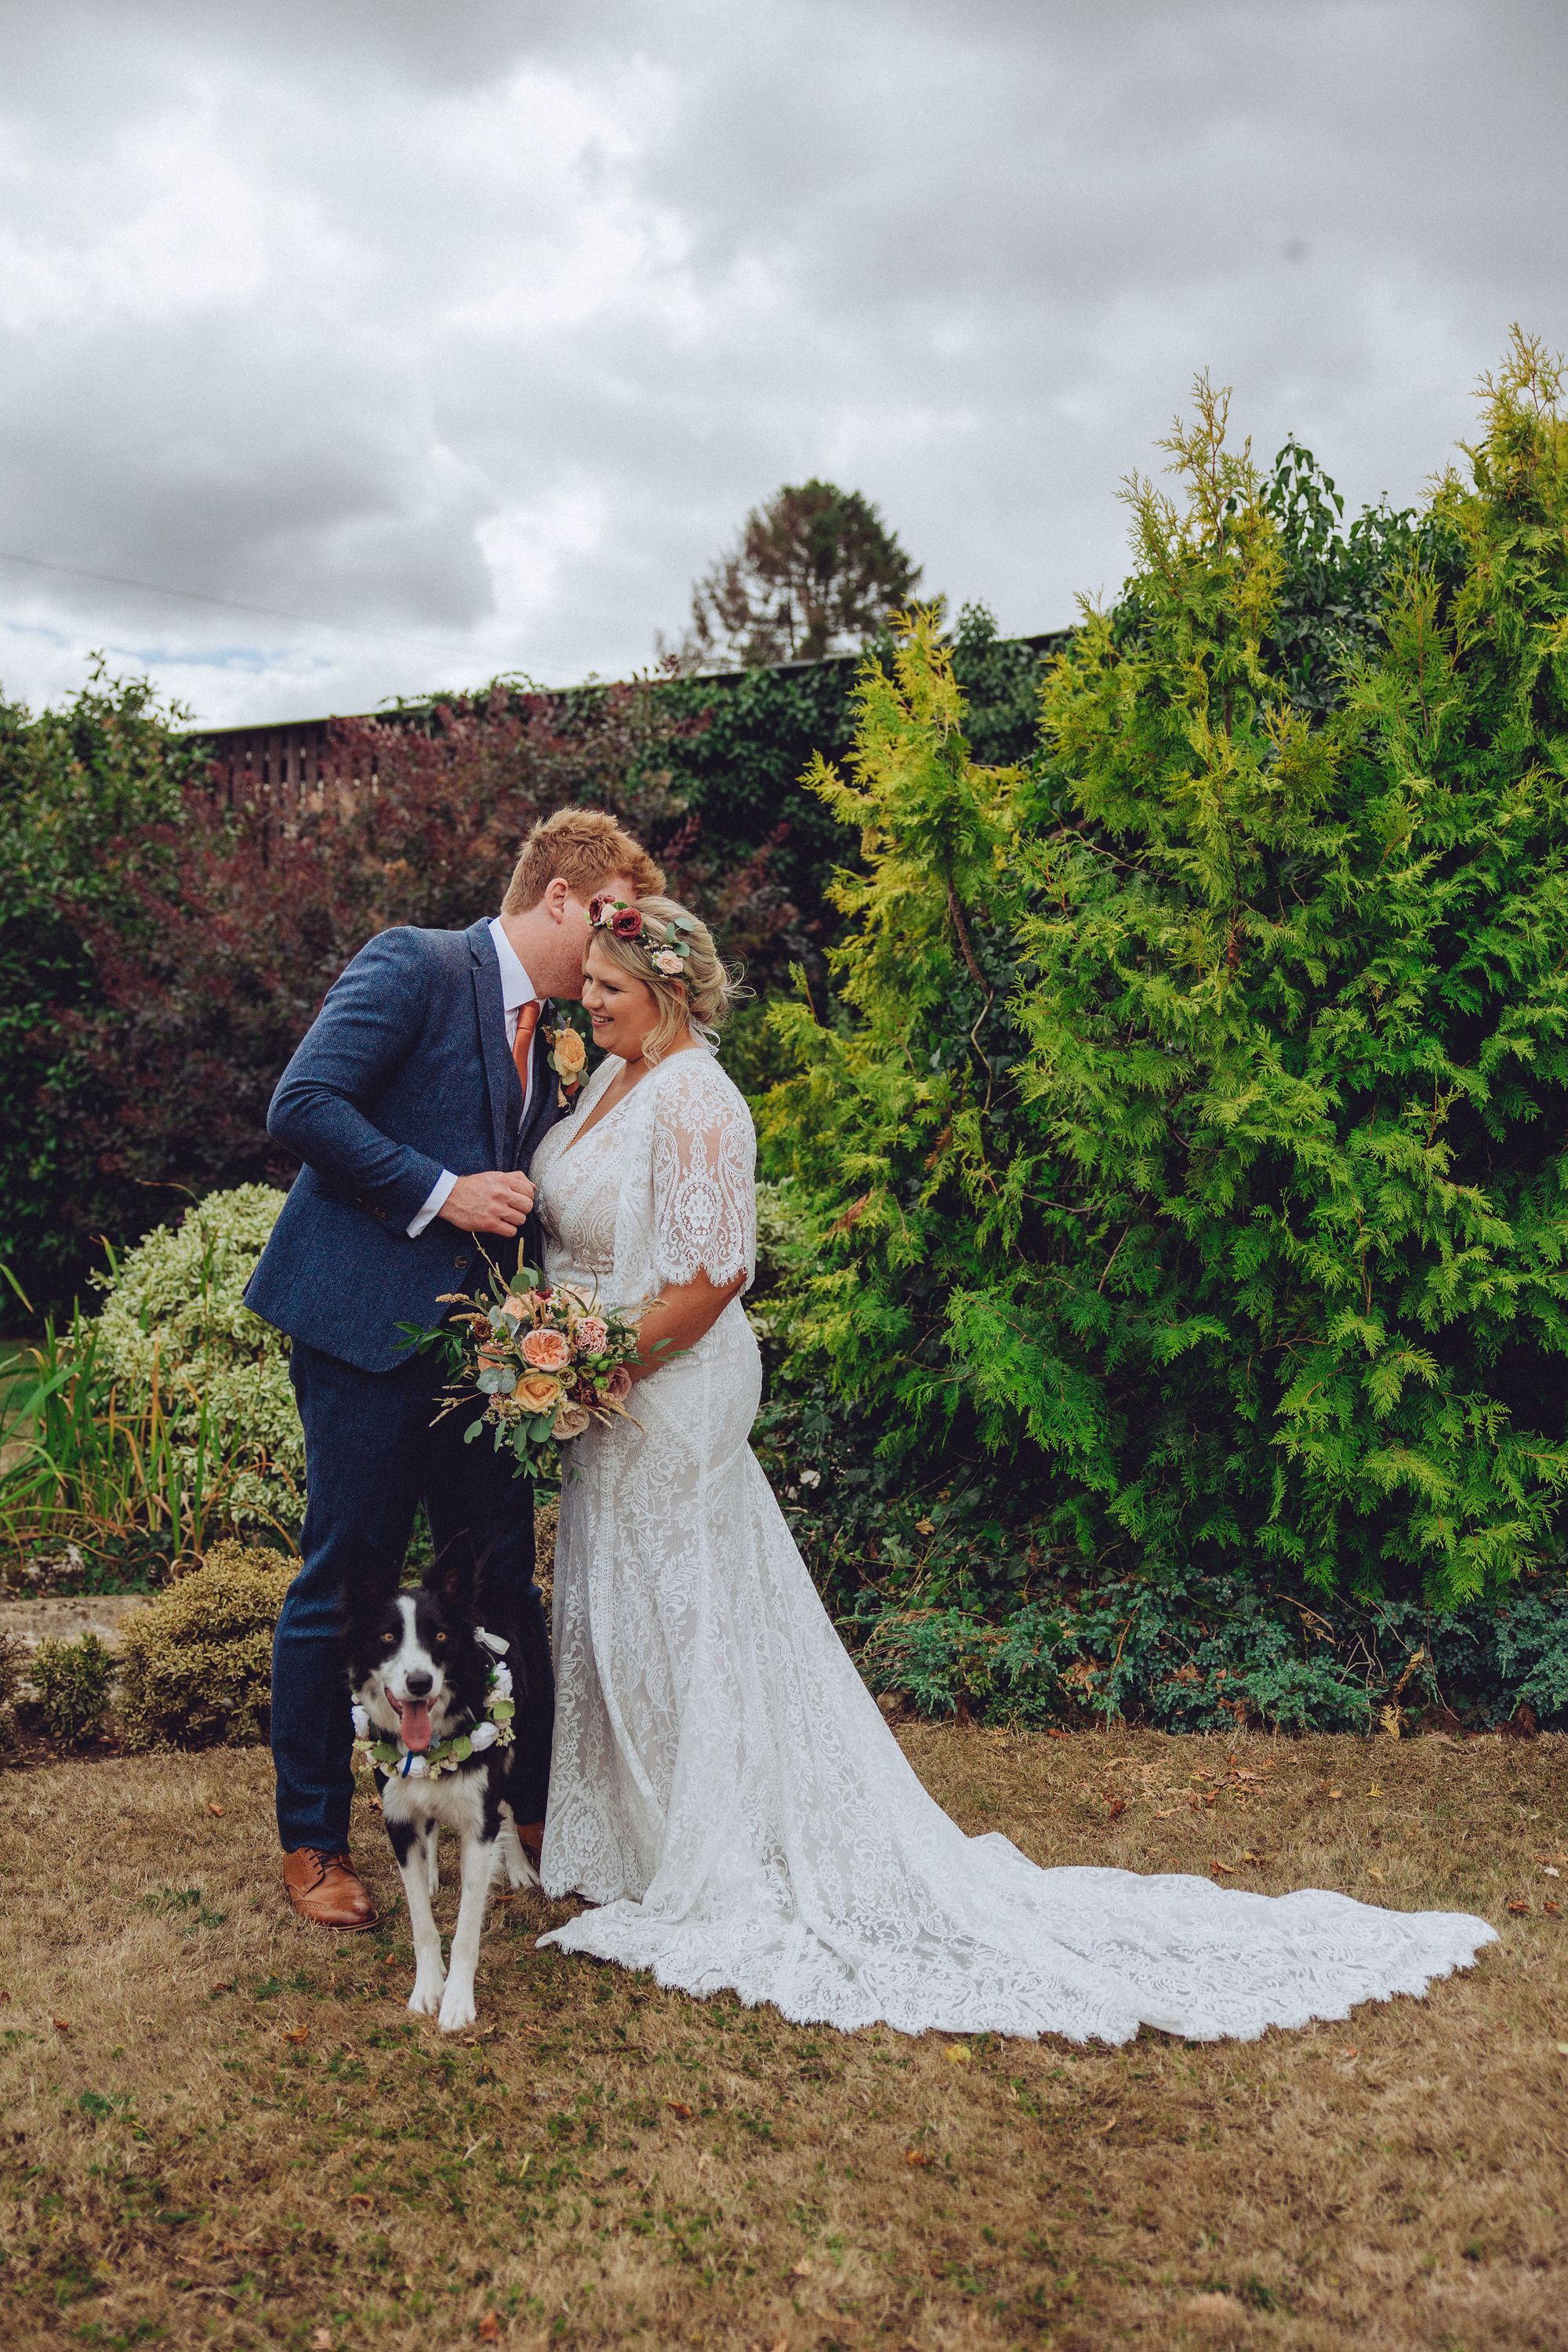 Nor and Dan with their border collie during their wedding reception in the farm gardens. Photo thanks to Fordtography.